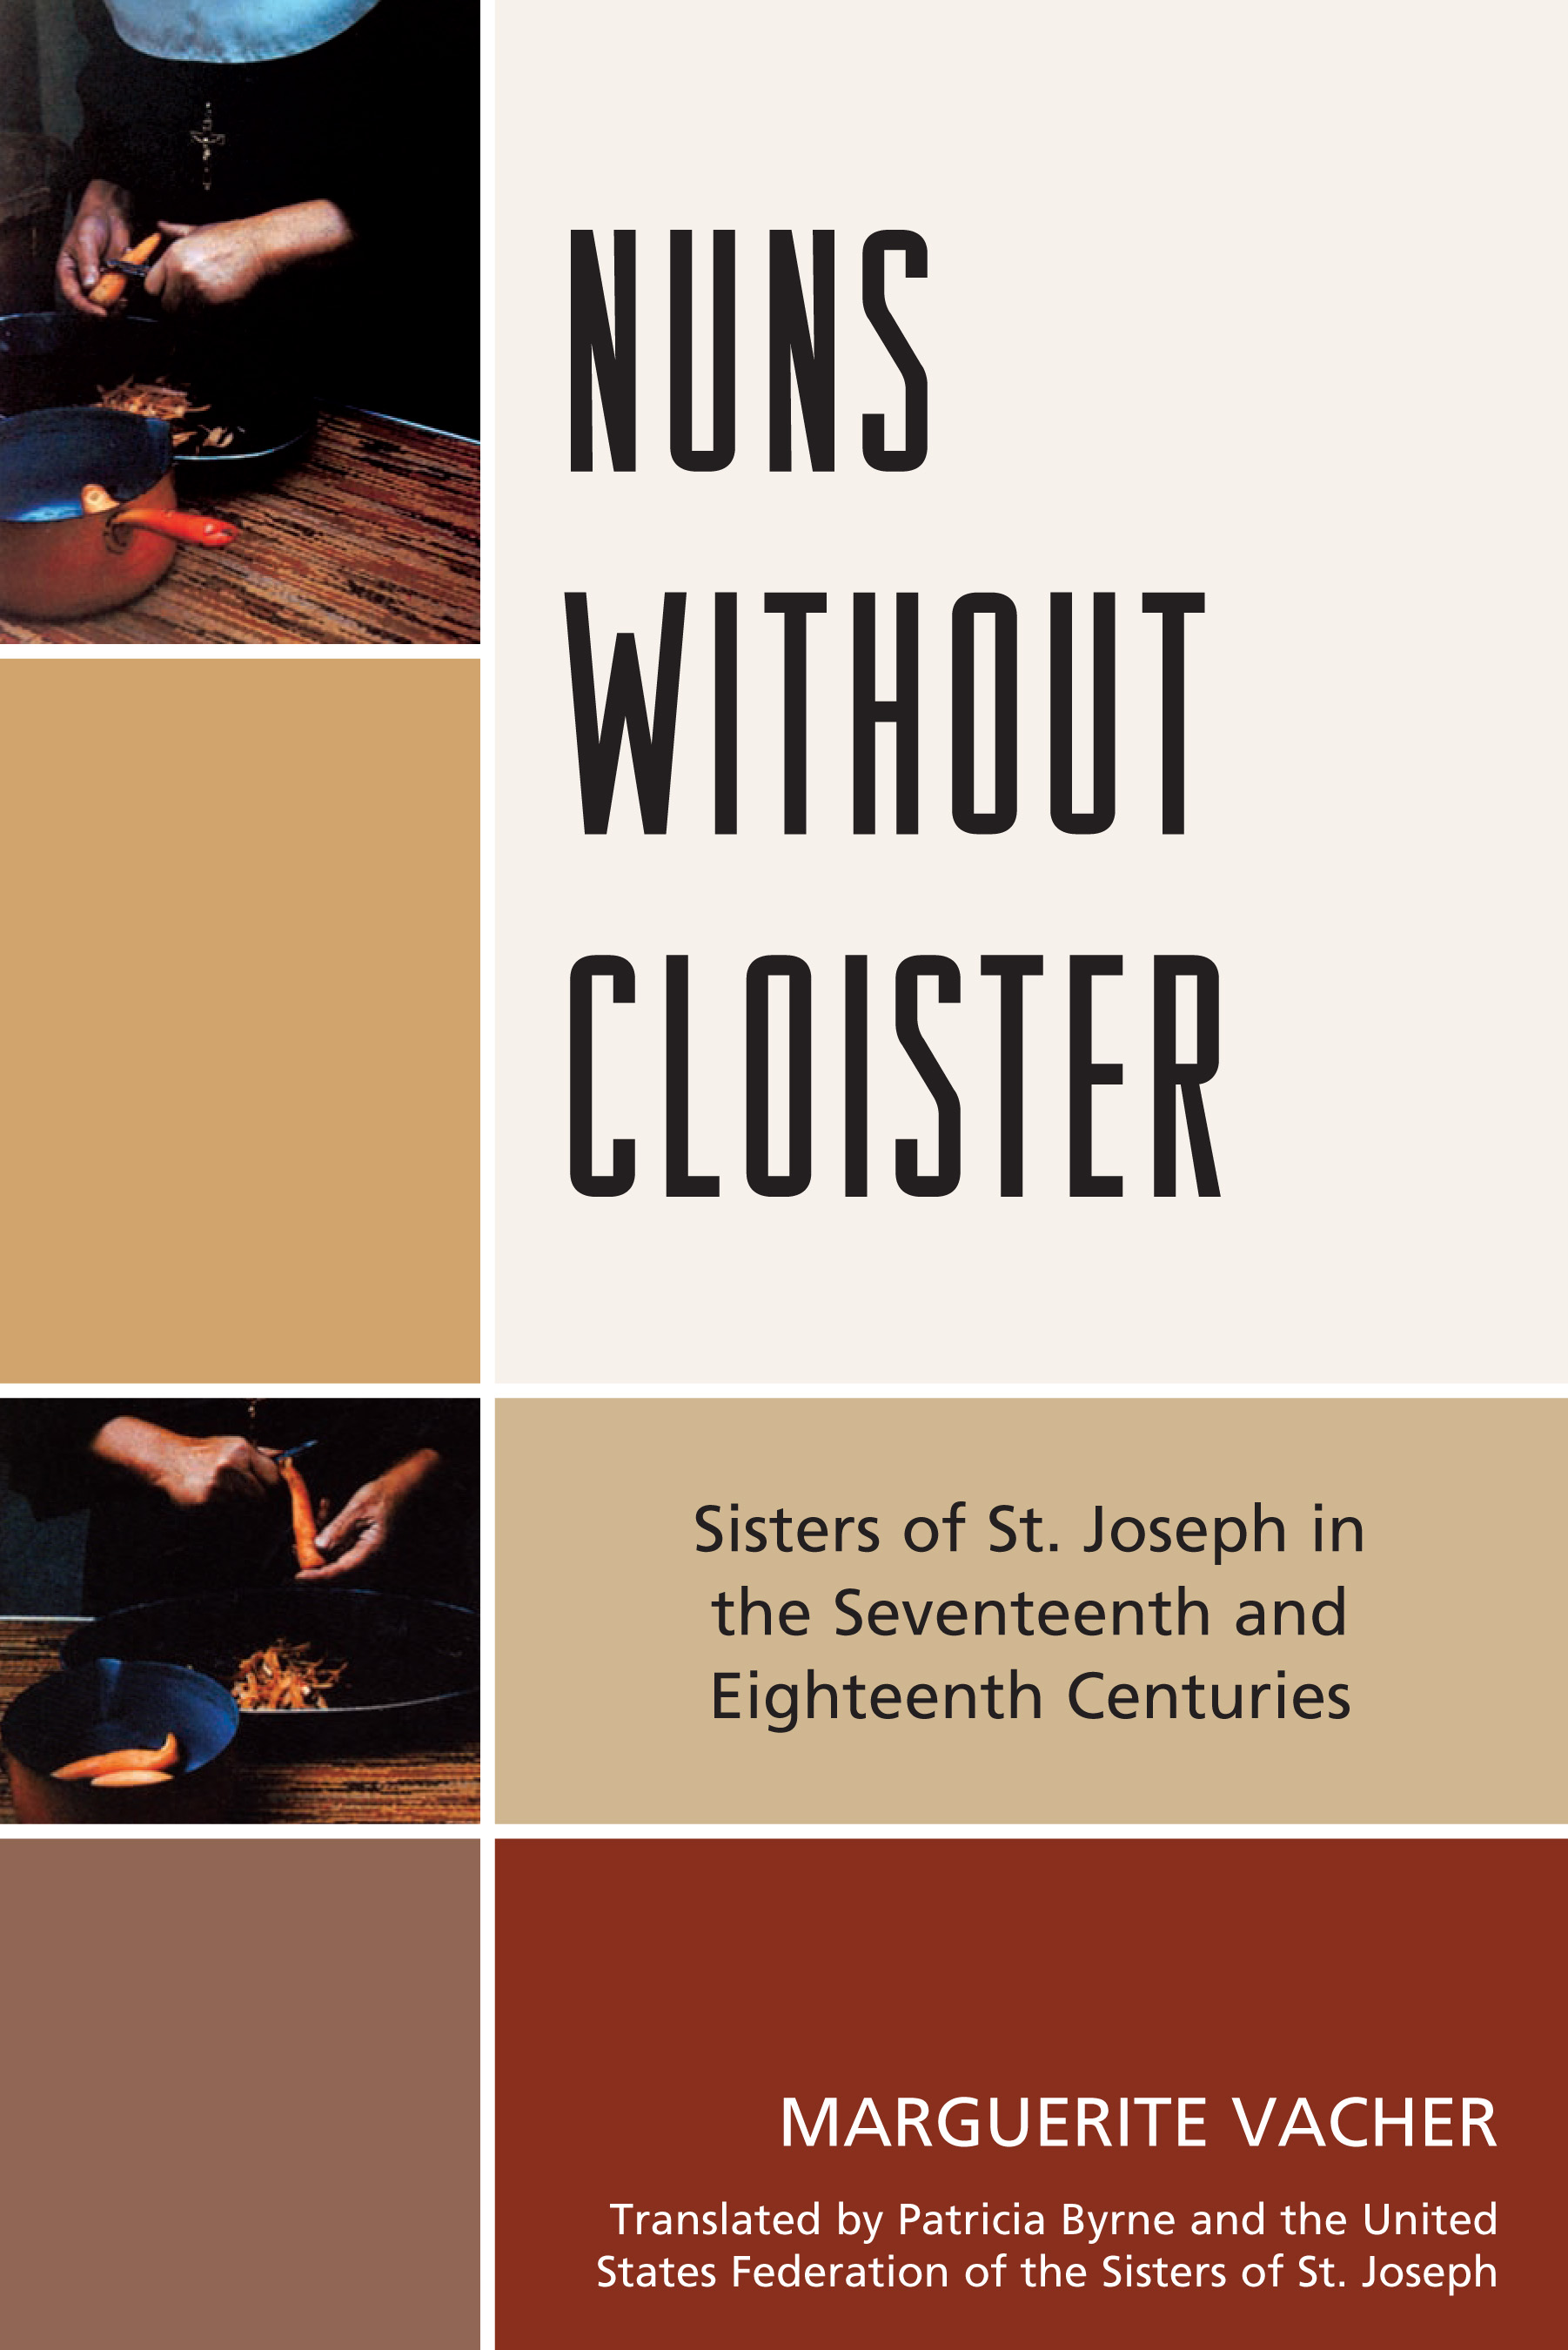 Nuns Without Cloister: Sisters of St. Joseph in the Seventeenth and Eighteenth Centuries